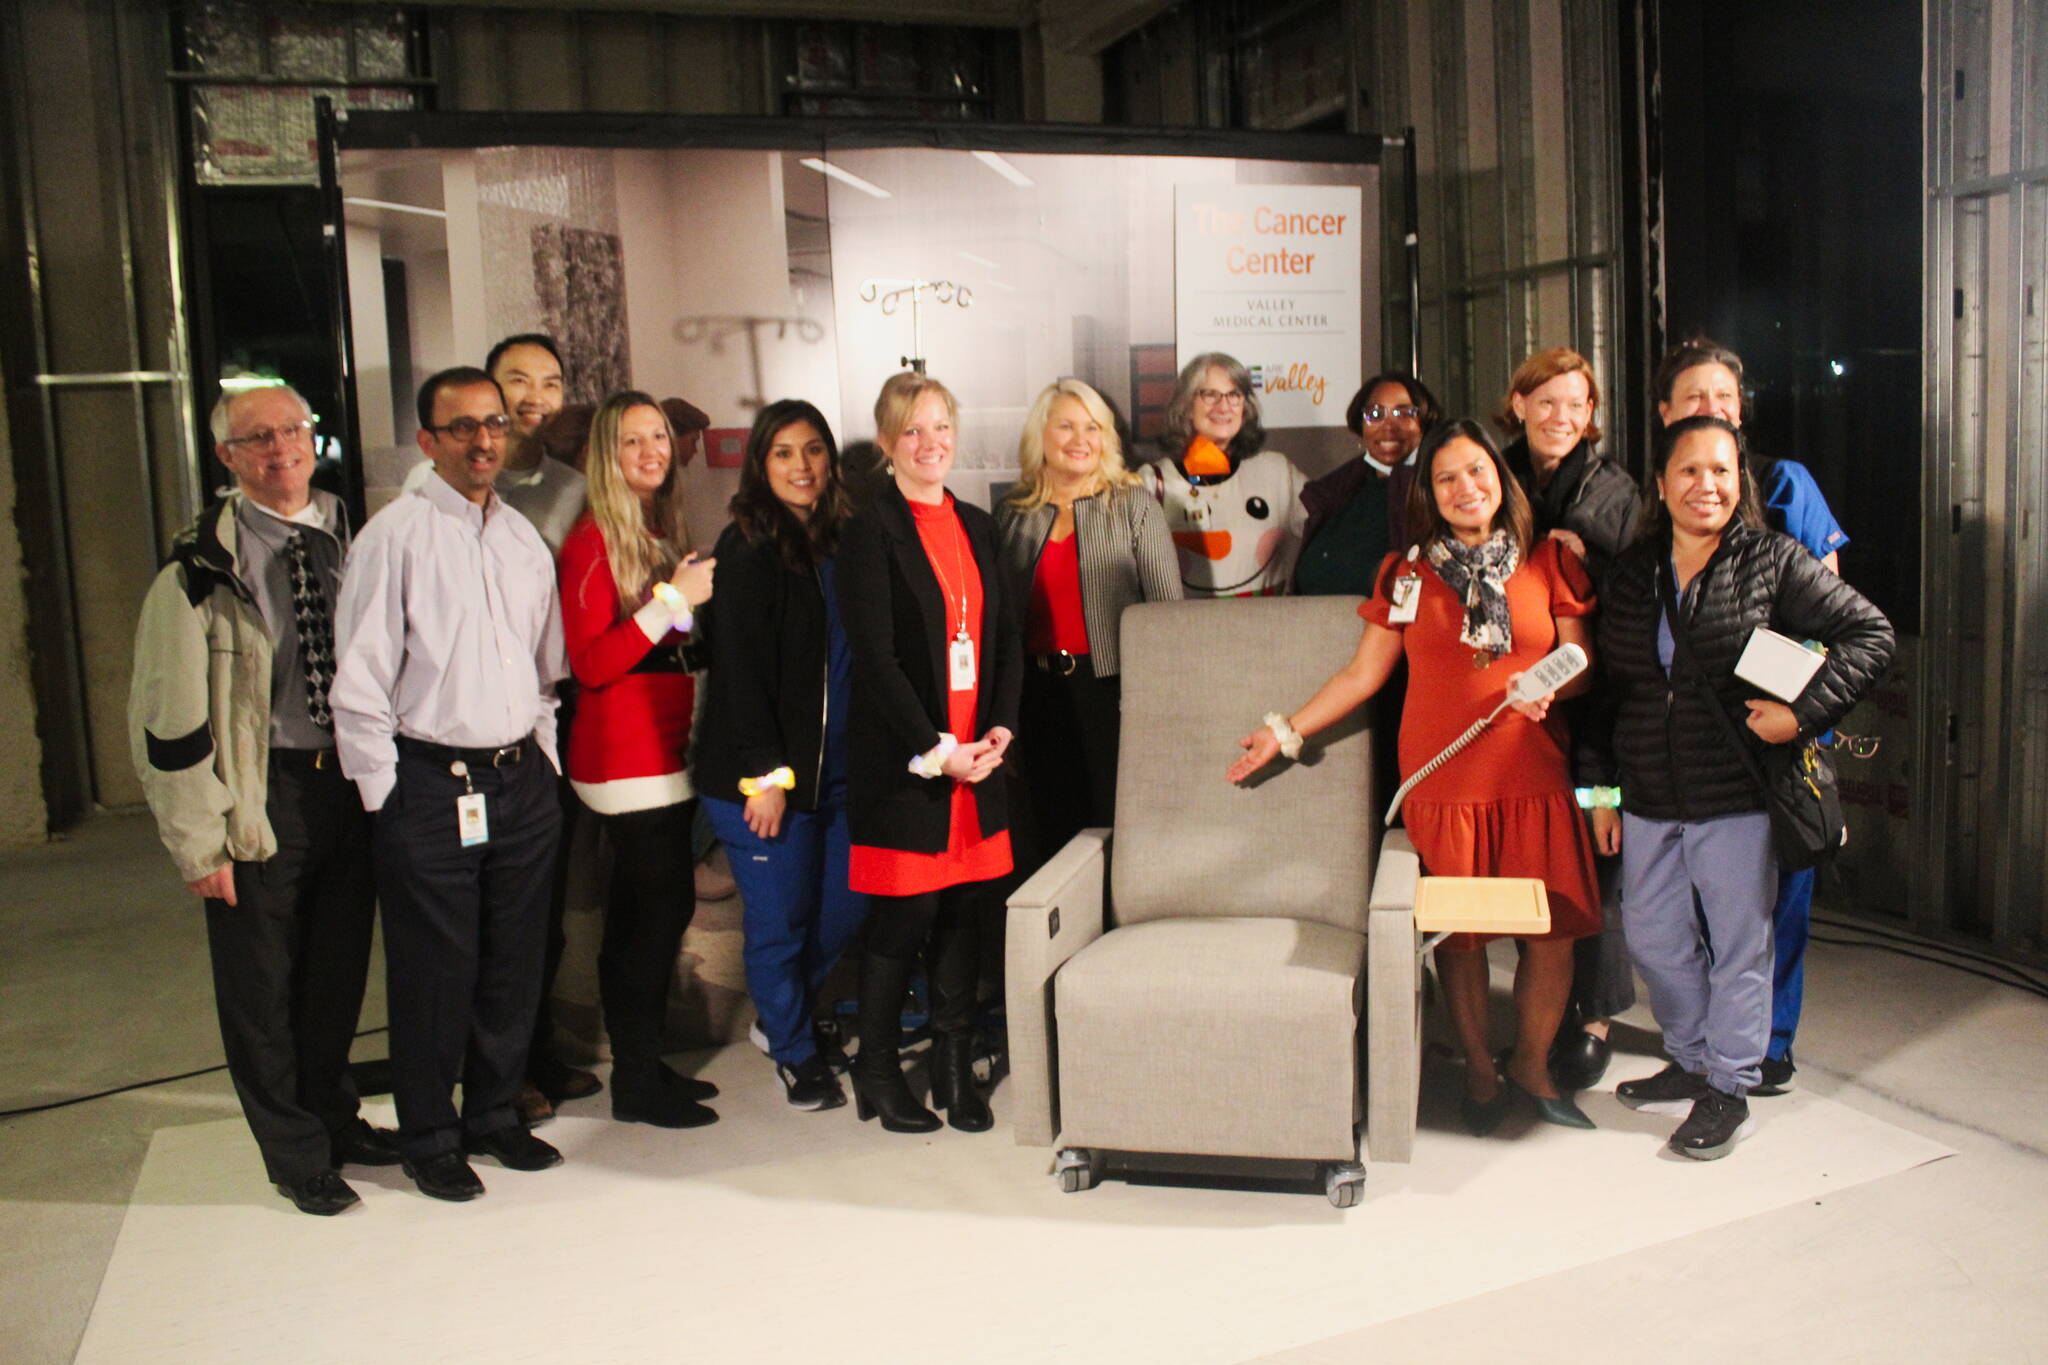 Members of the Valley Medical Oncology department pose with one of the chairs from the Infusion Center. Each chair costs $6,000. (Photo by Bailey Jo Josie/Sound Publishing)